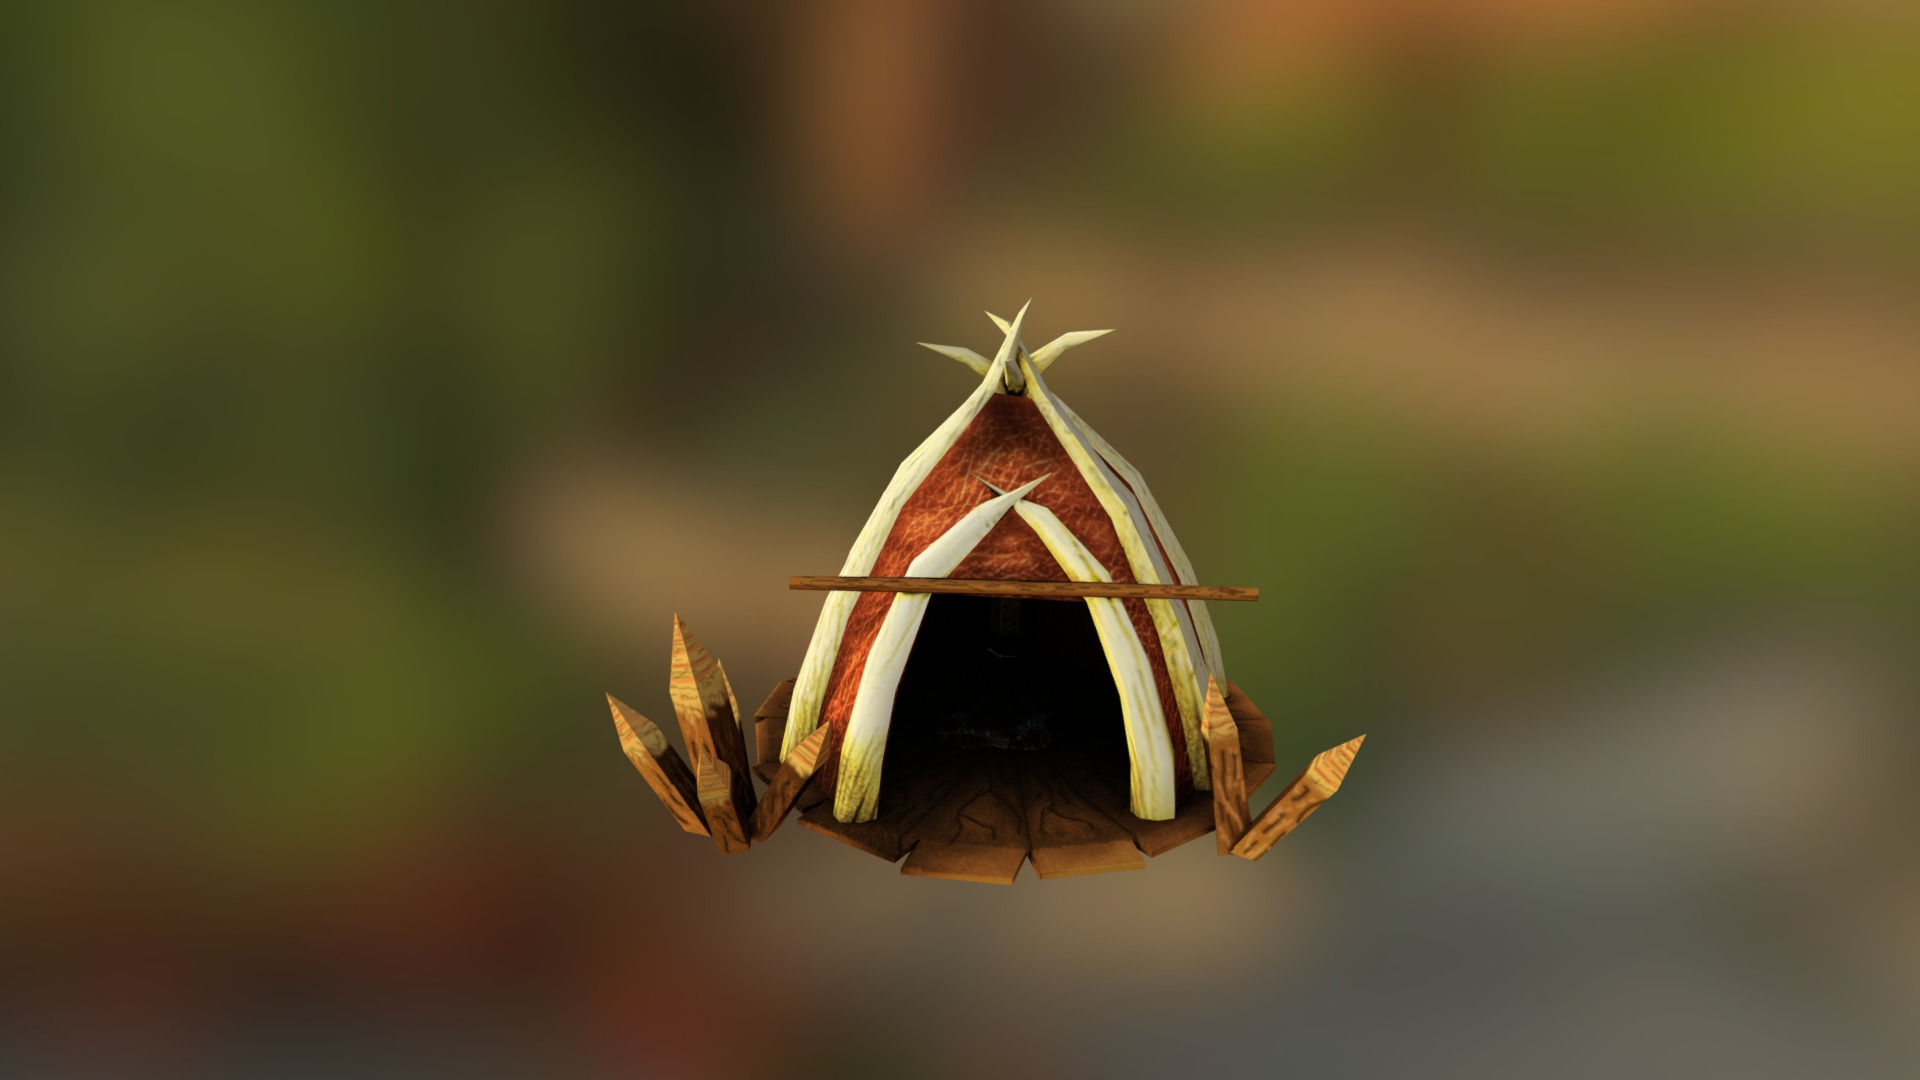 3D model [GoblinsUnityProject] – GoblinTent - This is a 3D model of the [GoblinsUnityProject] - GoblinTent. The 3D model is about a pineapple with a star on it.